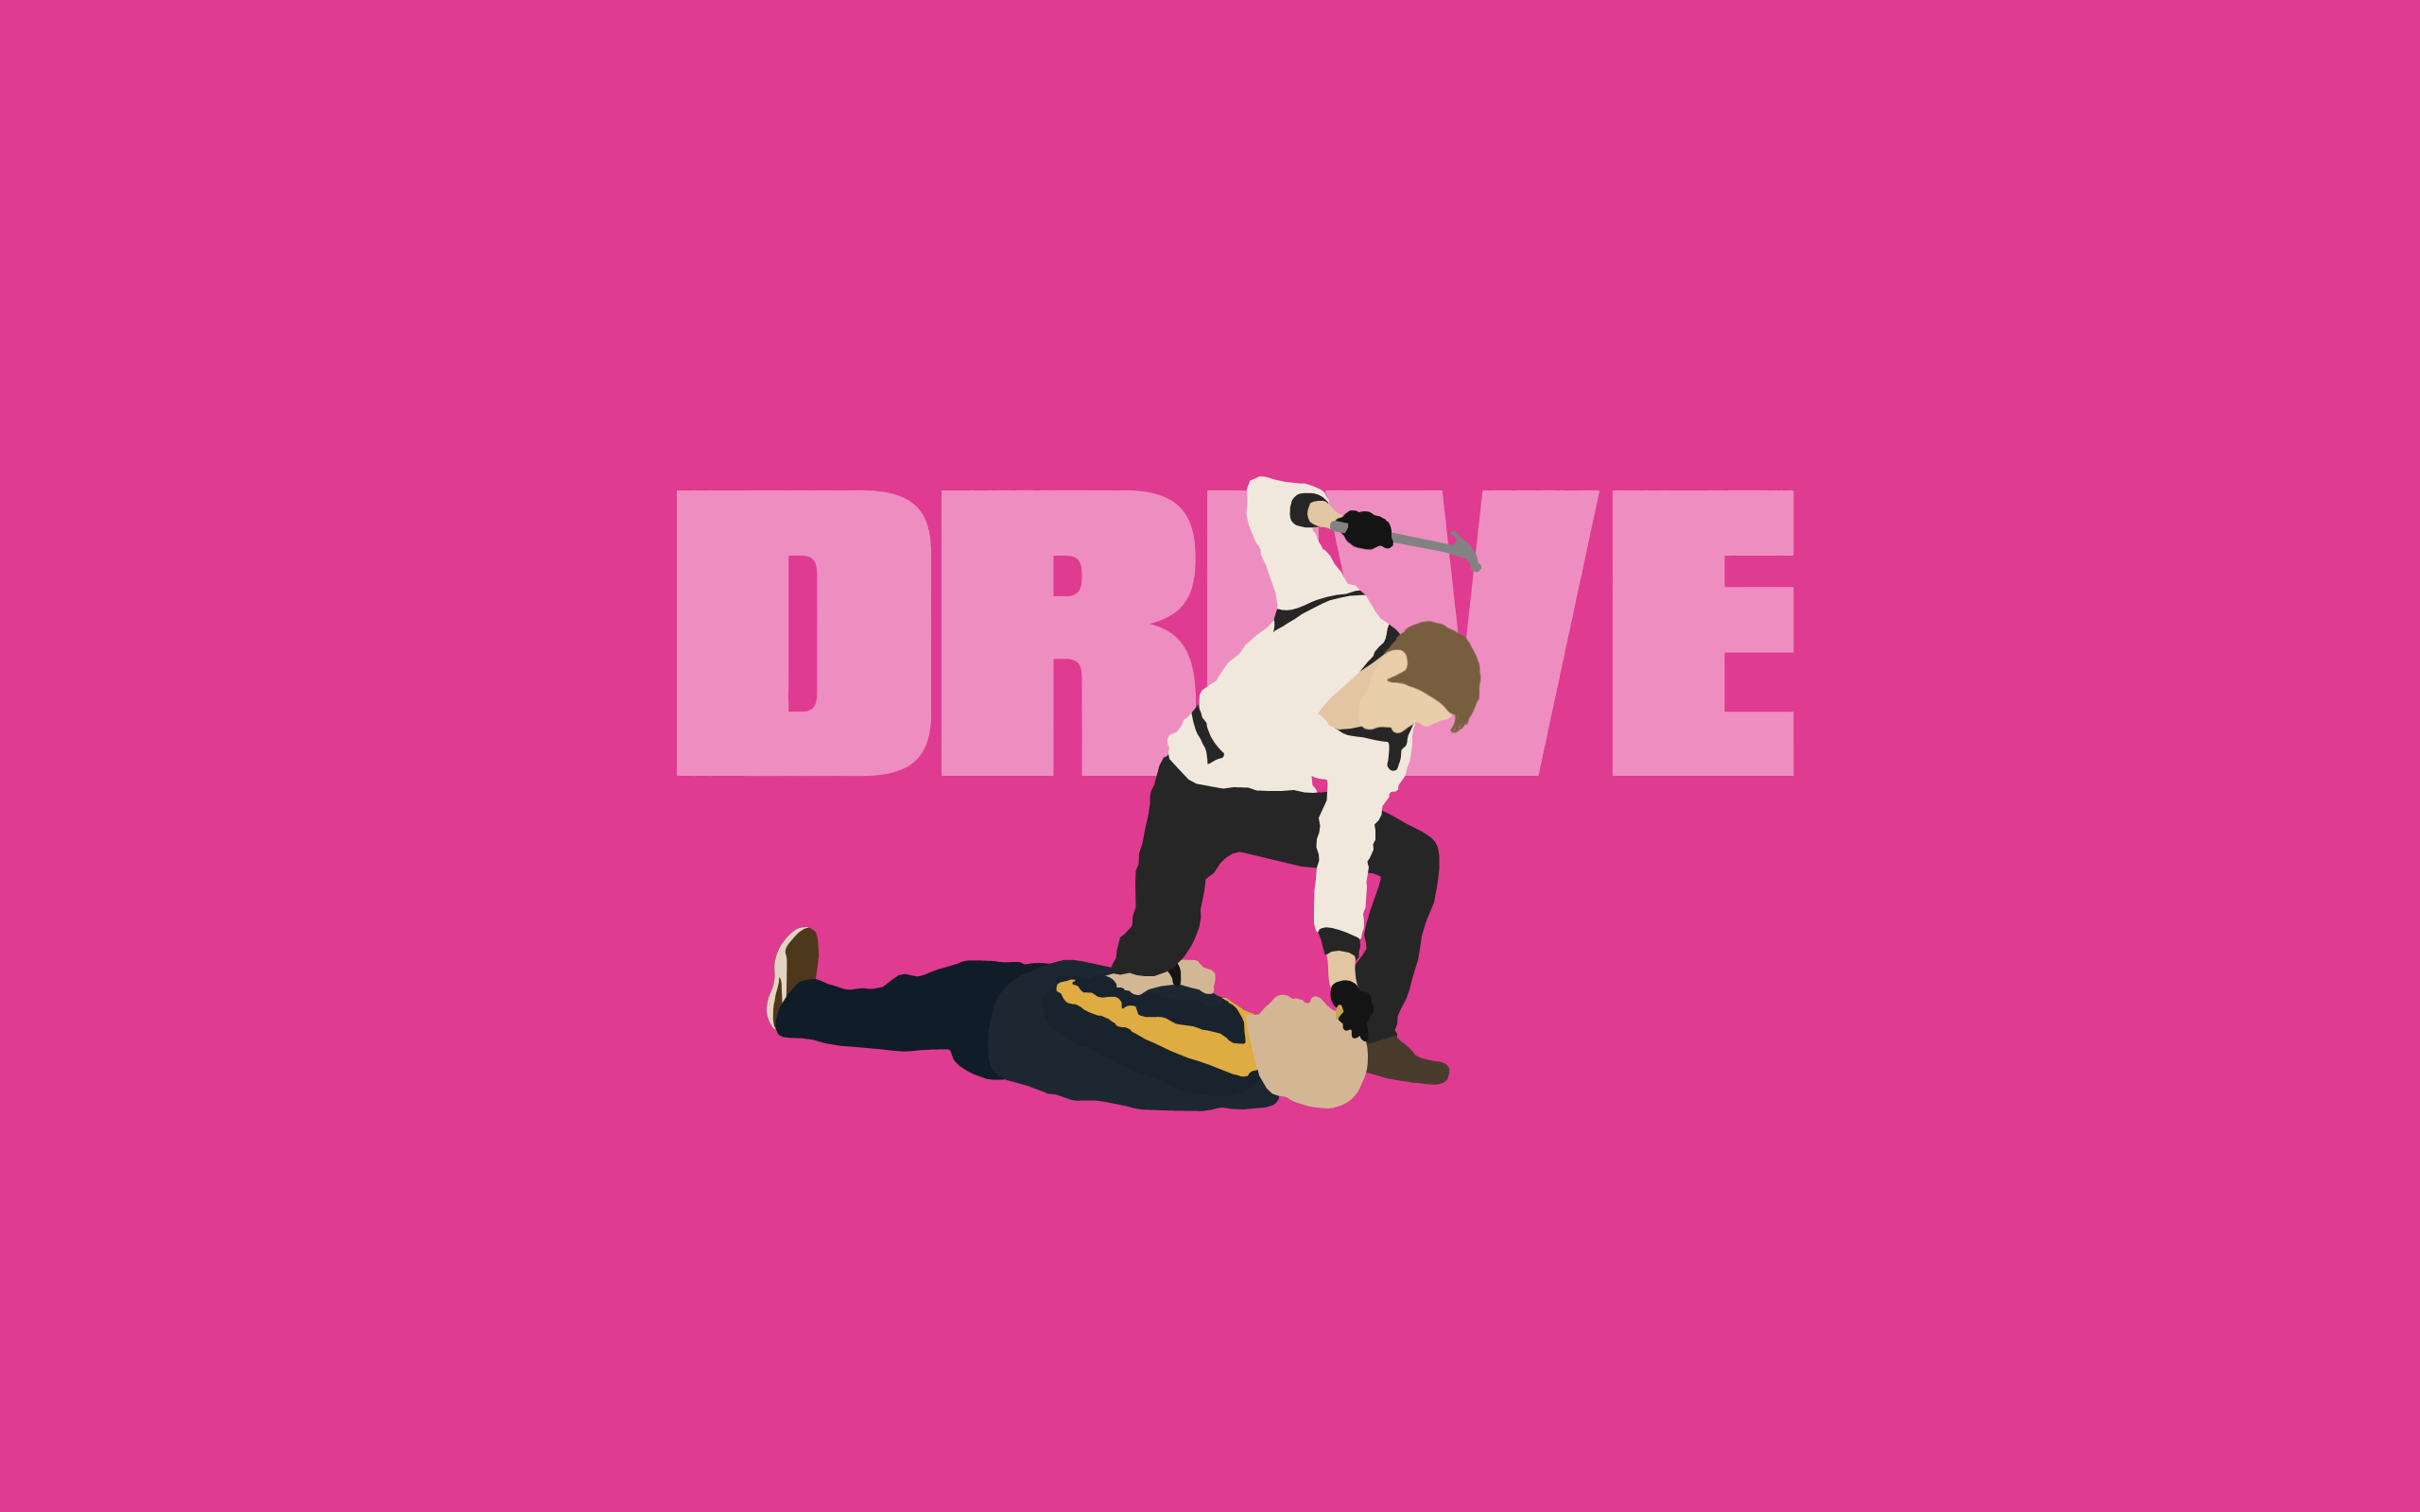 Drive Wallpapers